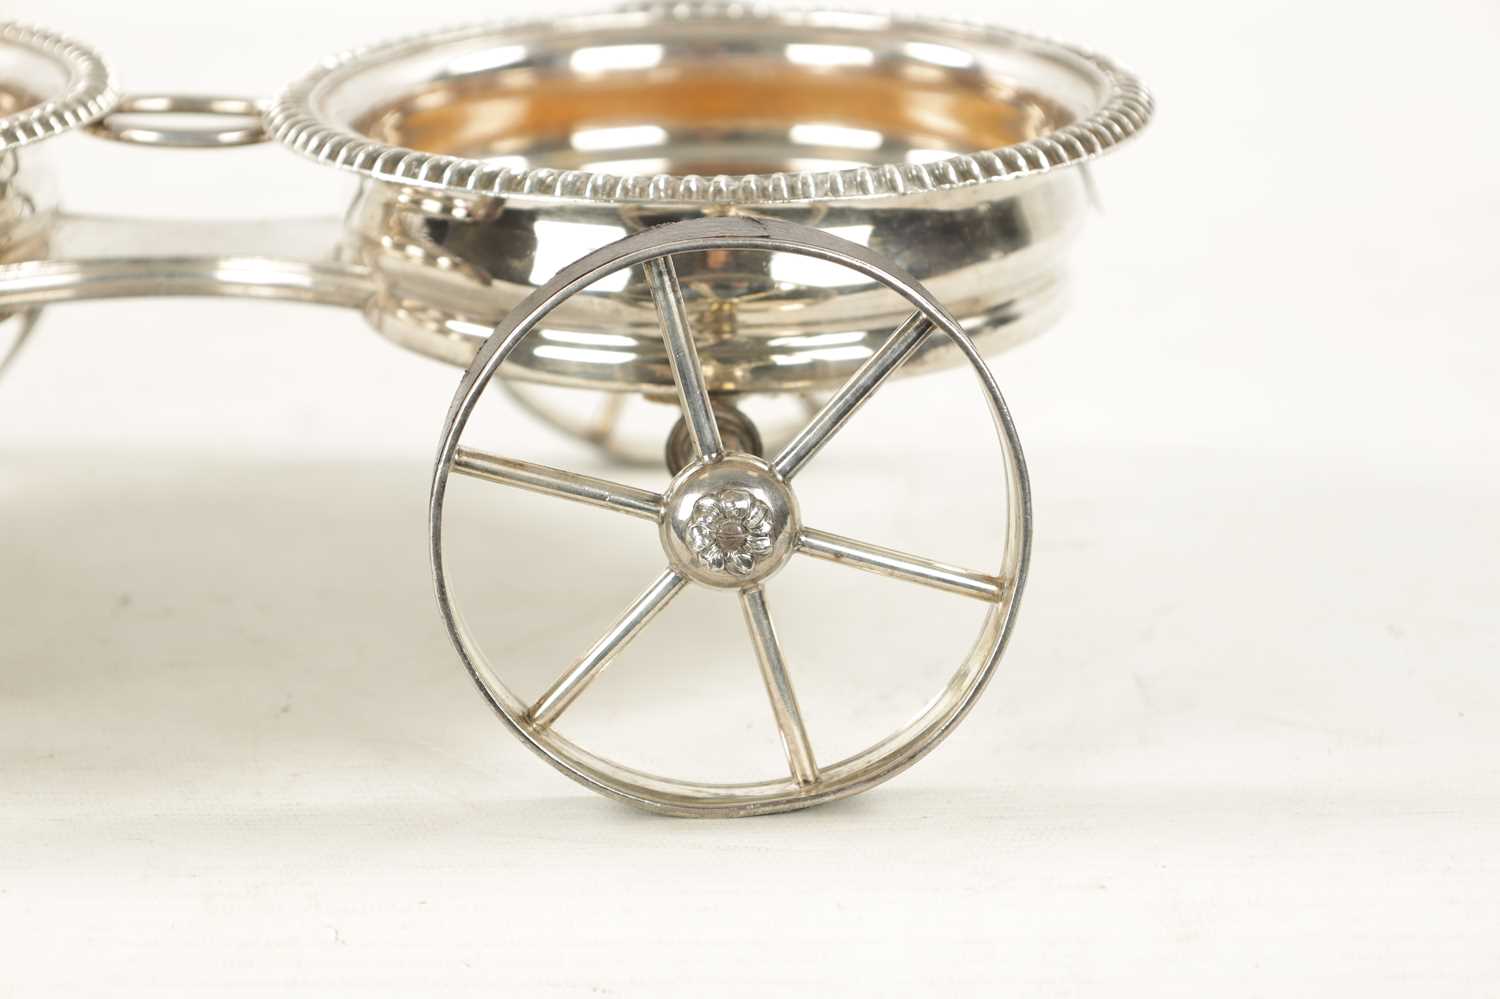 A 19TH CENTURY NOVELTY SILVER PLATED TABLE TOP DOUBLE COASTER TROLLEY FORMED AS A CARRIAGE - Image 3 of 7